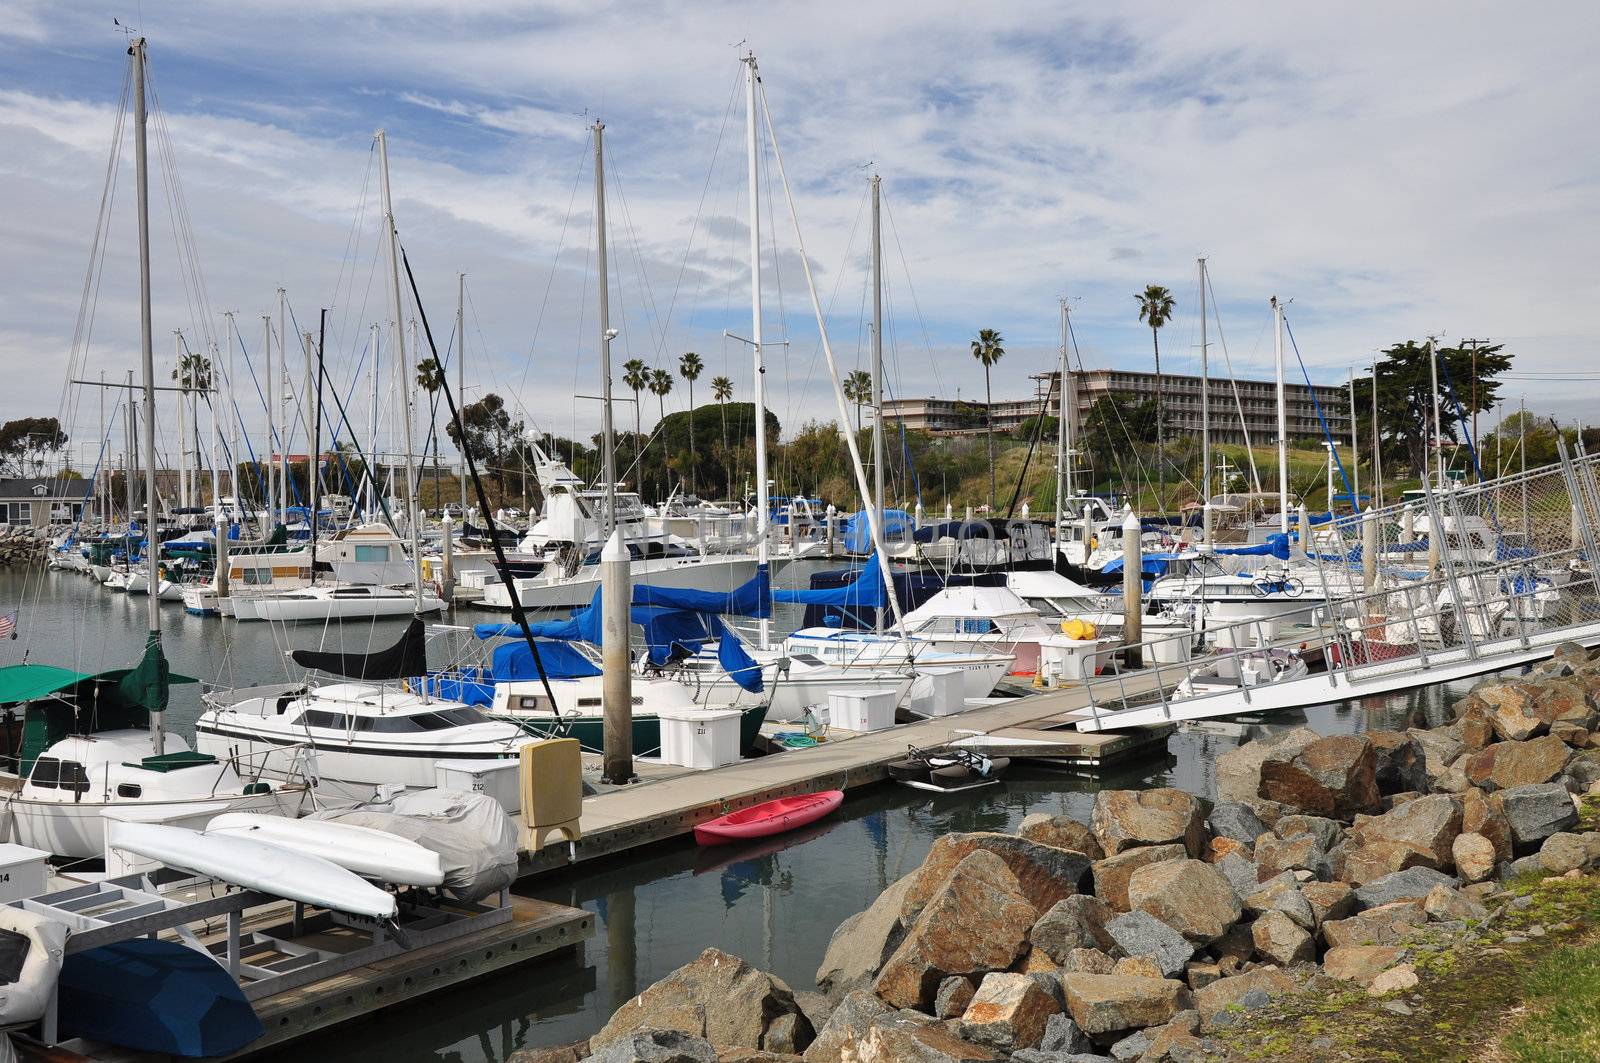 Boats and yachts of all sizes rest at dock at a small harbor in Oceanside, California.